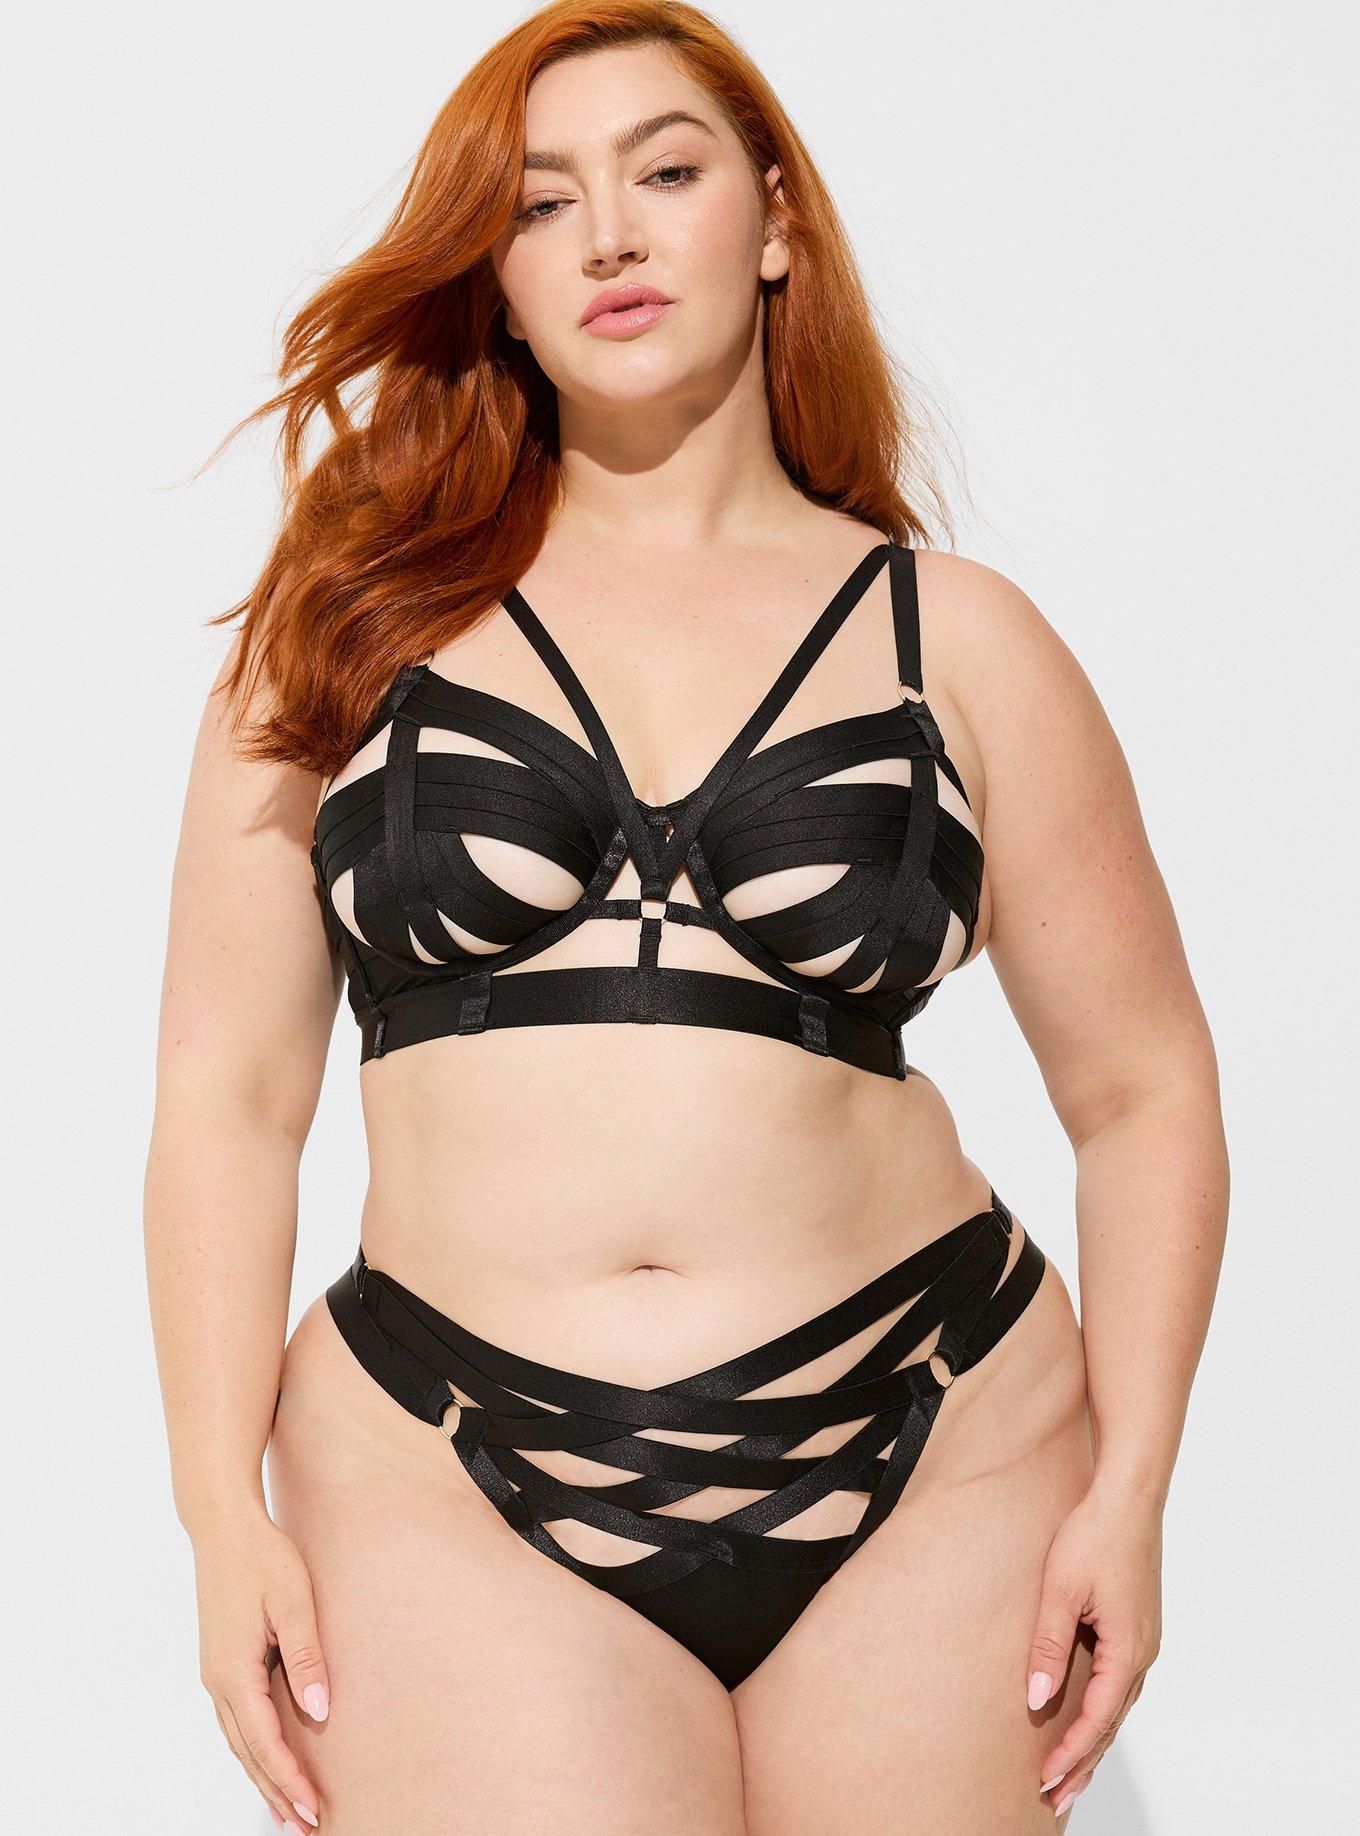 Torrid Black Lace Bralette, I'm Curvy, and Wearing Lingerie For the First  Time Totally Boosted My Confidence